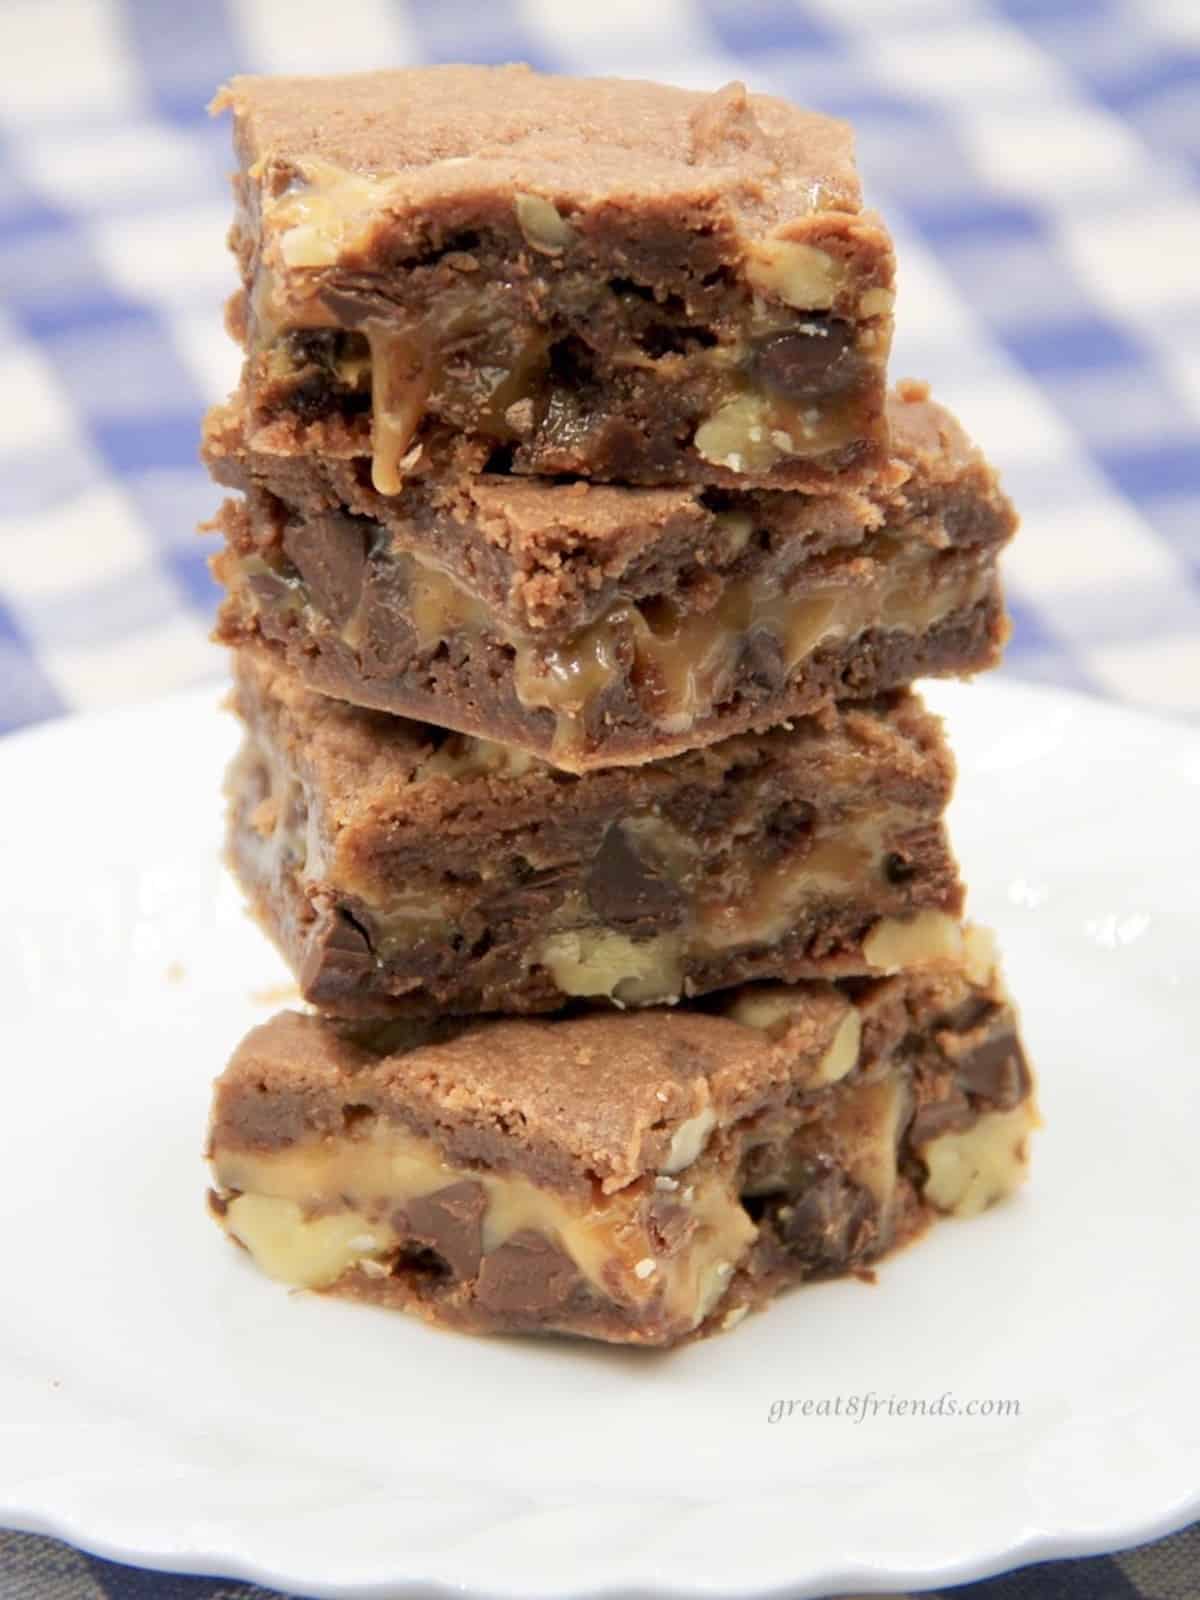 Four brownies made with caramel stacked on top of each other on a white plate on a blue and white checked tablecloth.